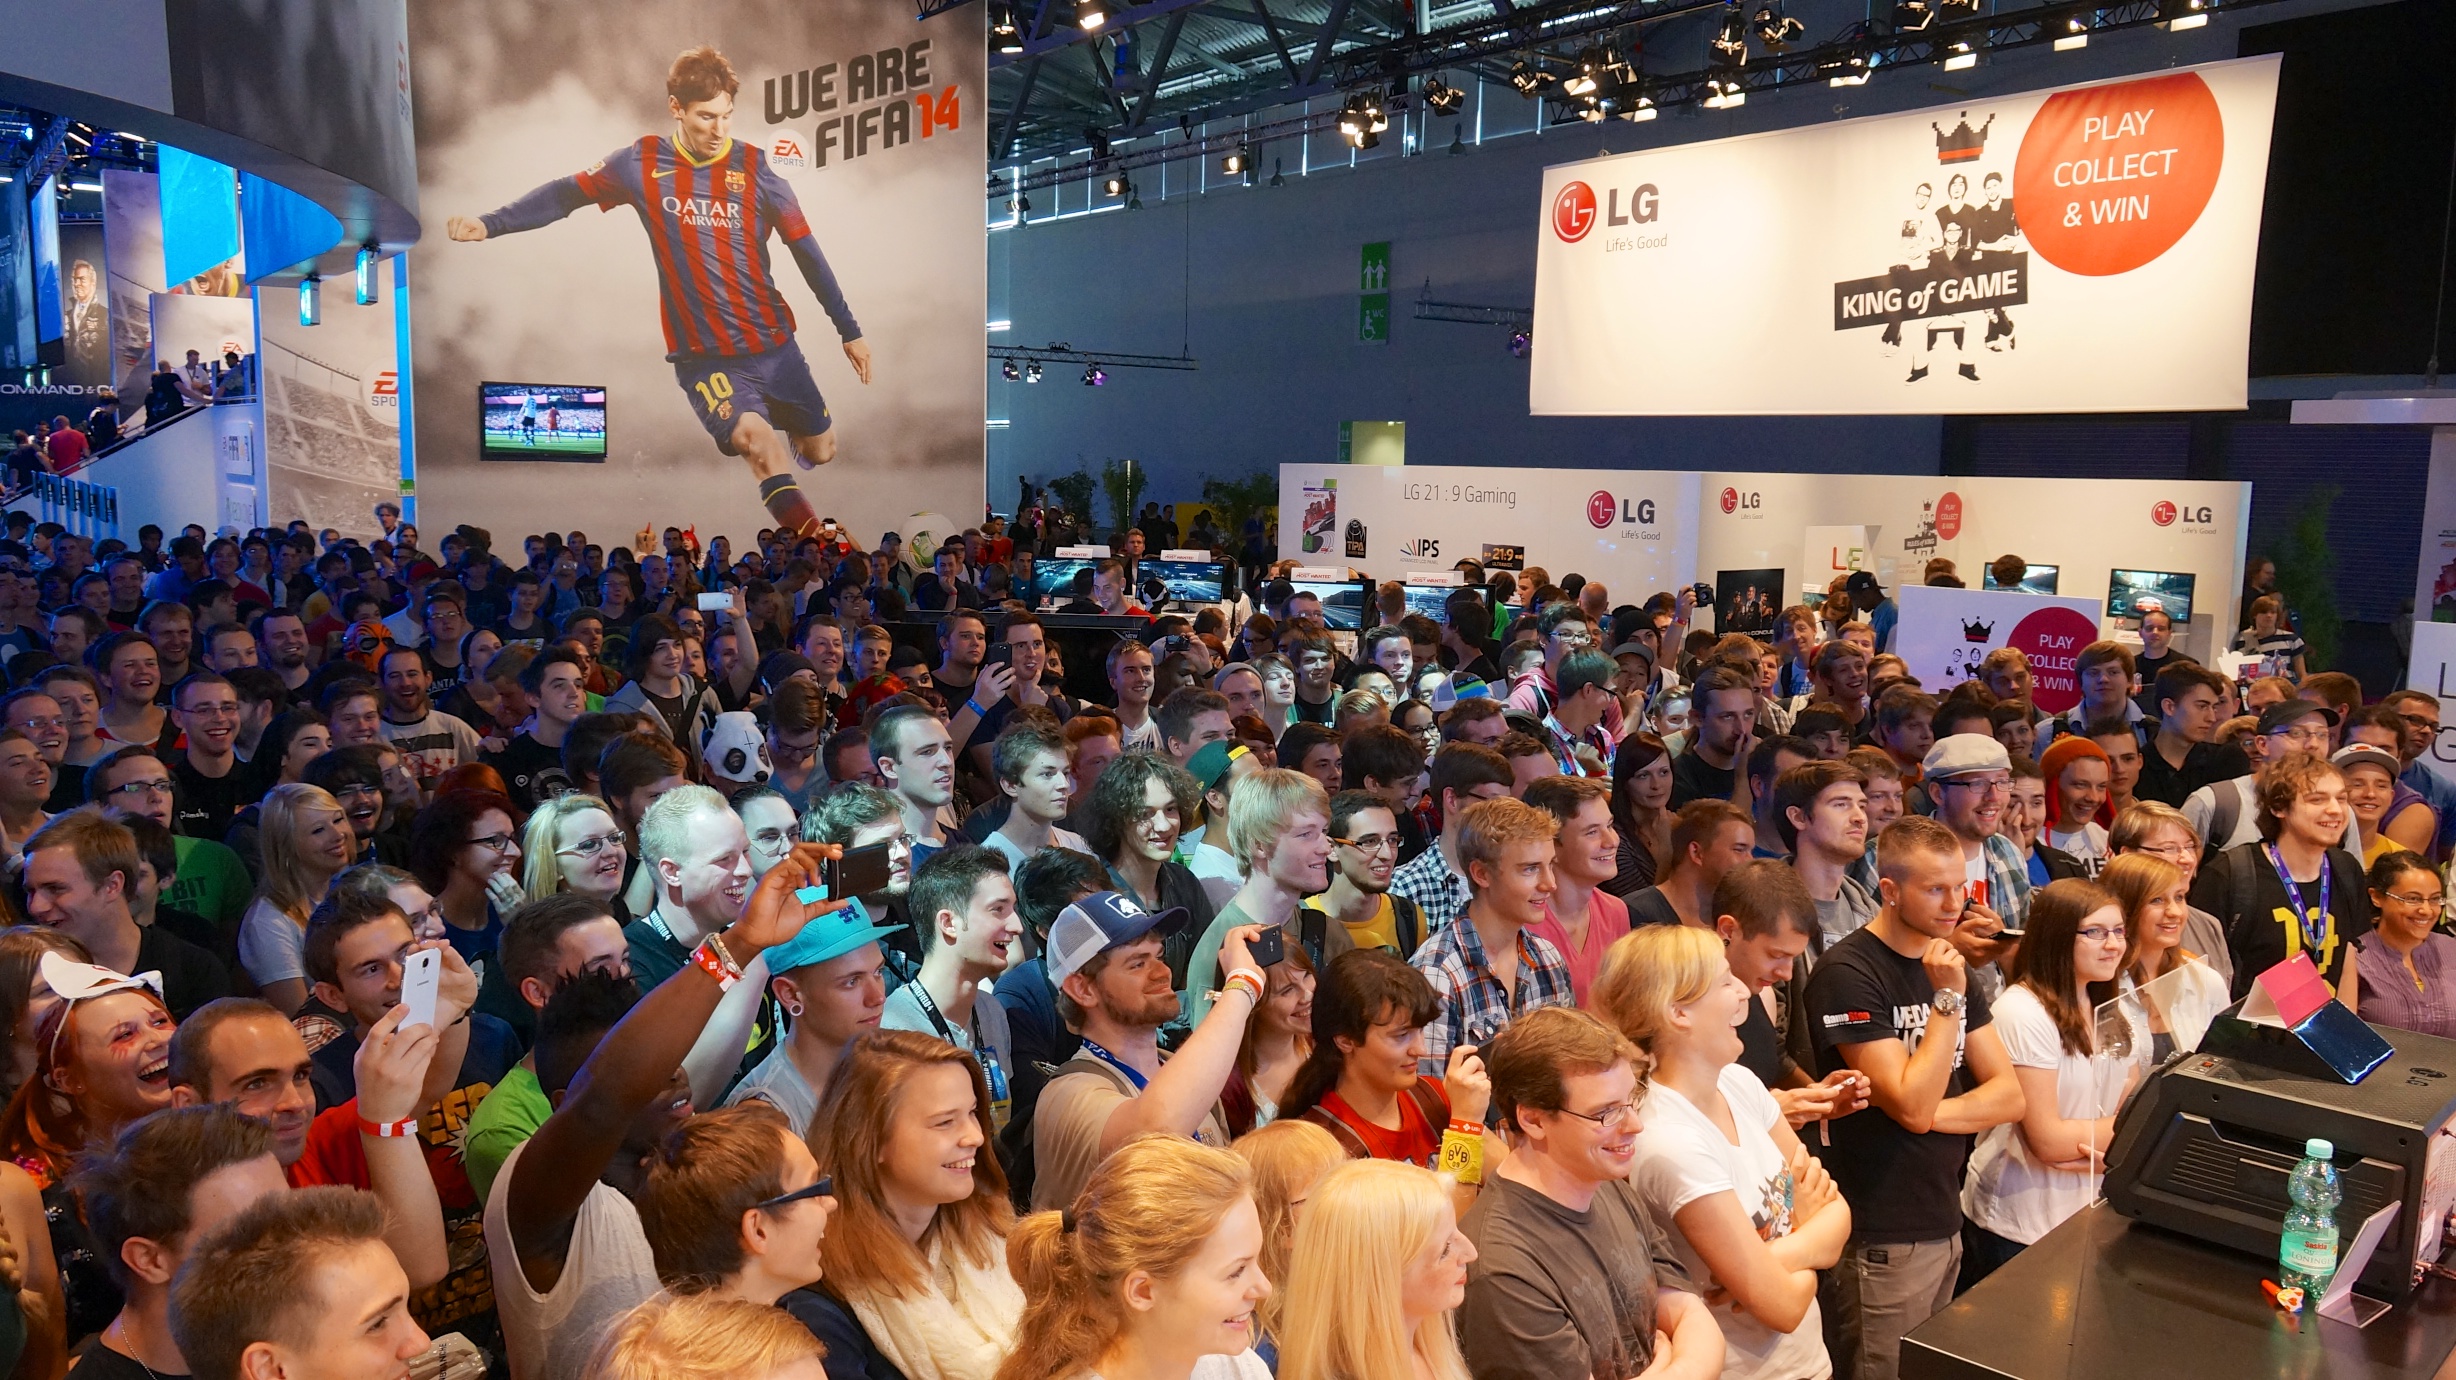 A large audience gathers at the main LG & EA stage at Gamescom 2013